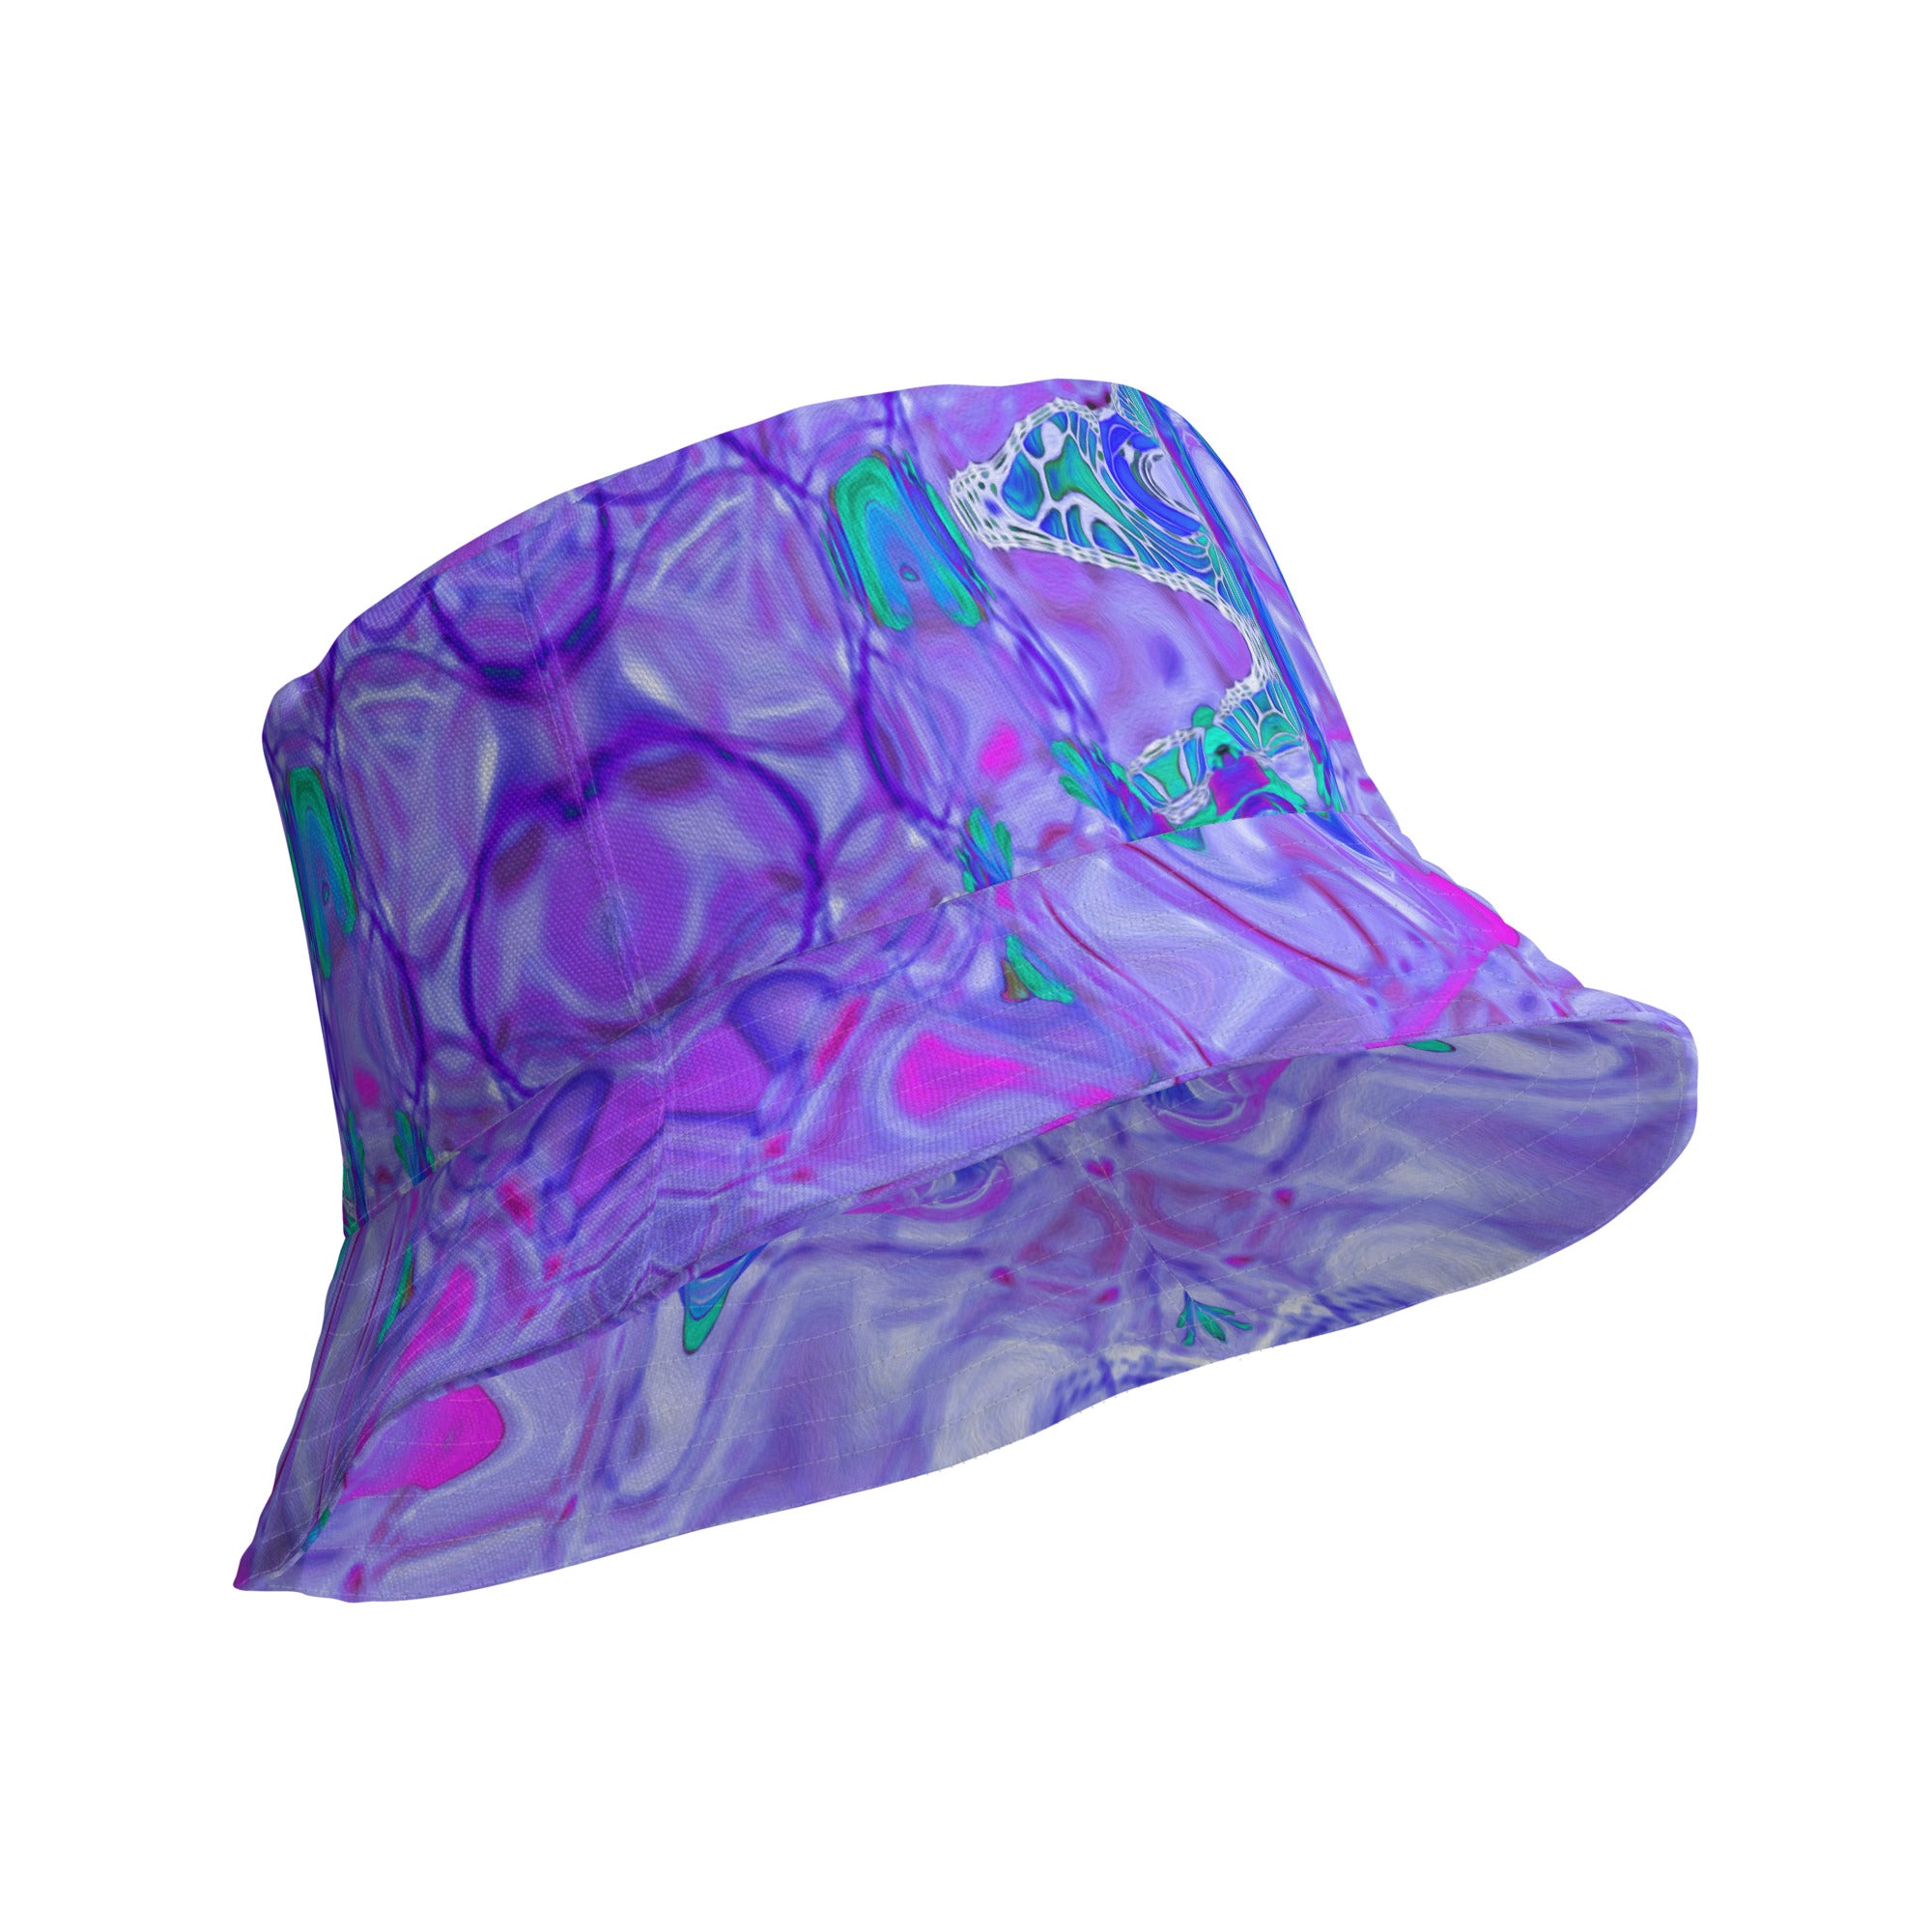 Reversible Bucket Hat | Cosmic Abstract Purple and White Retro Ripples